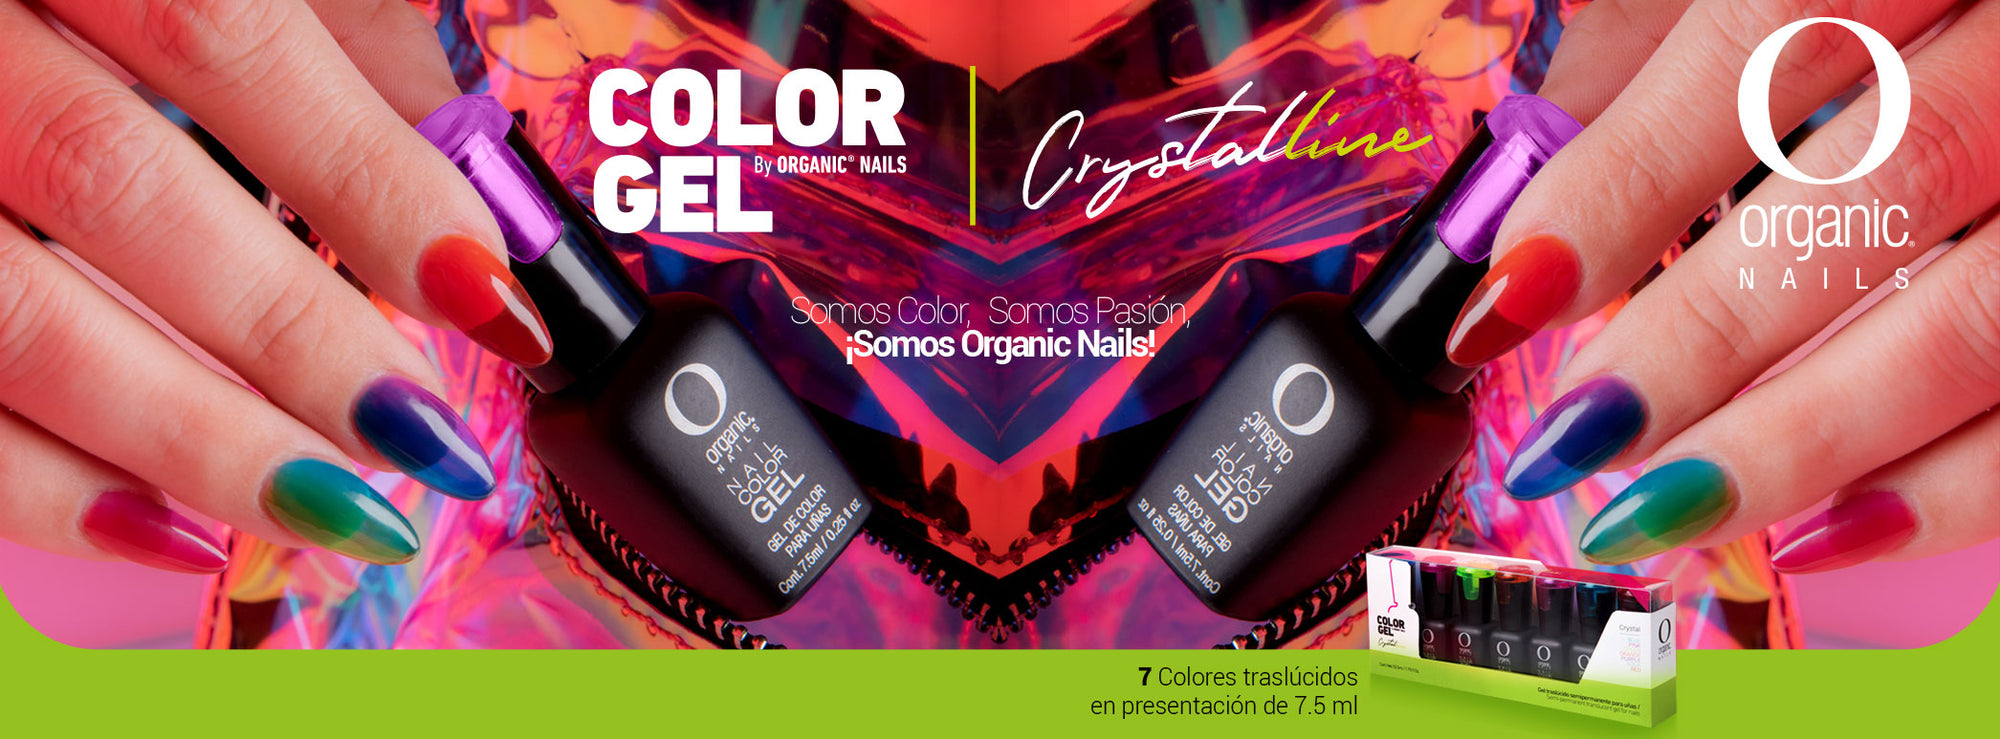 Color Gel by Organic Nails